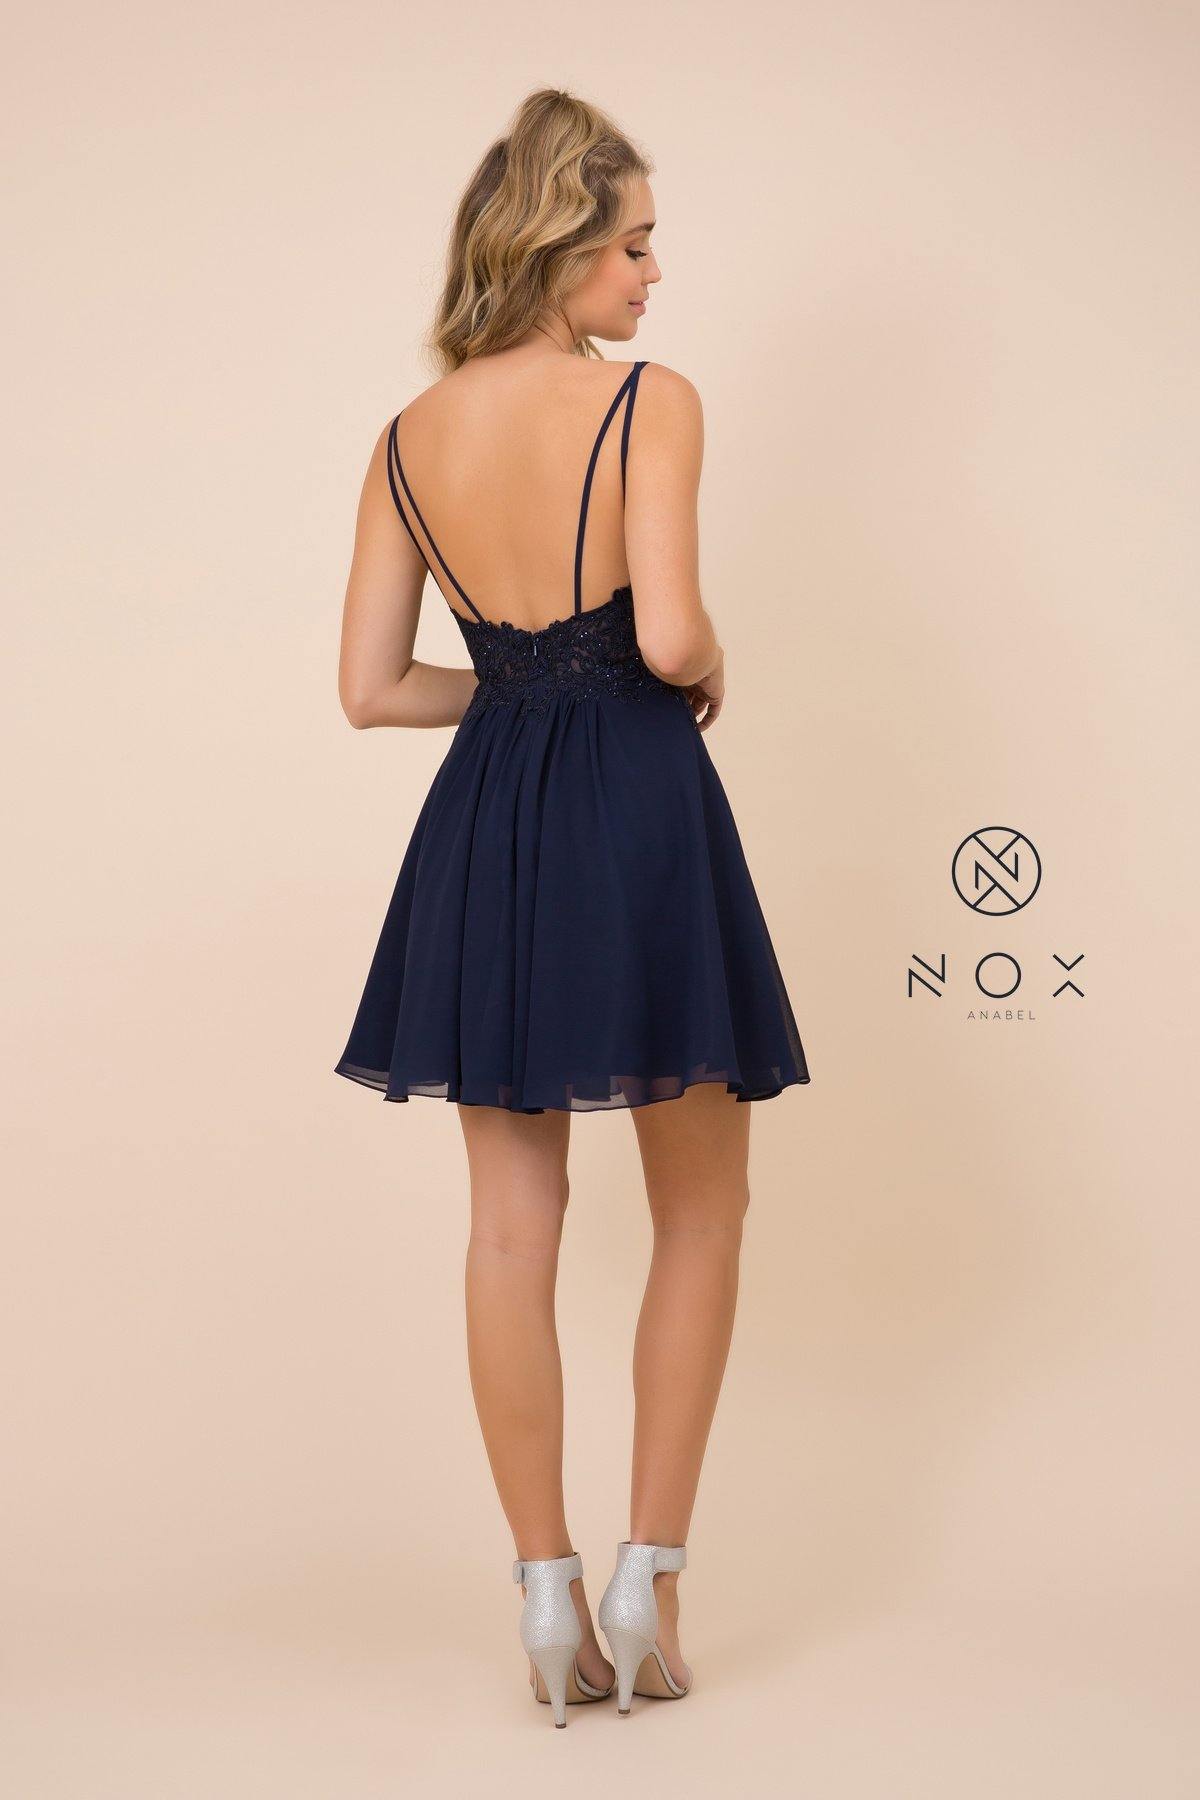 Short Homecoming Dress Sale - The Dress Outlet